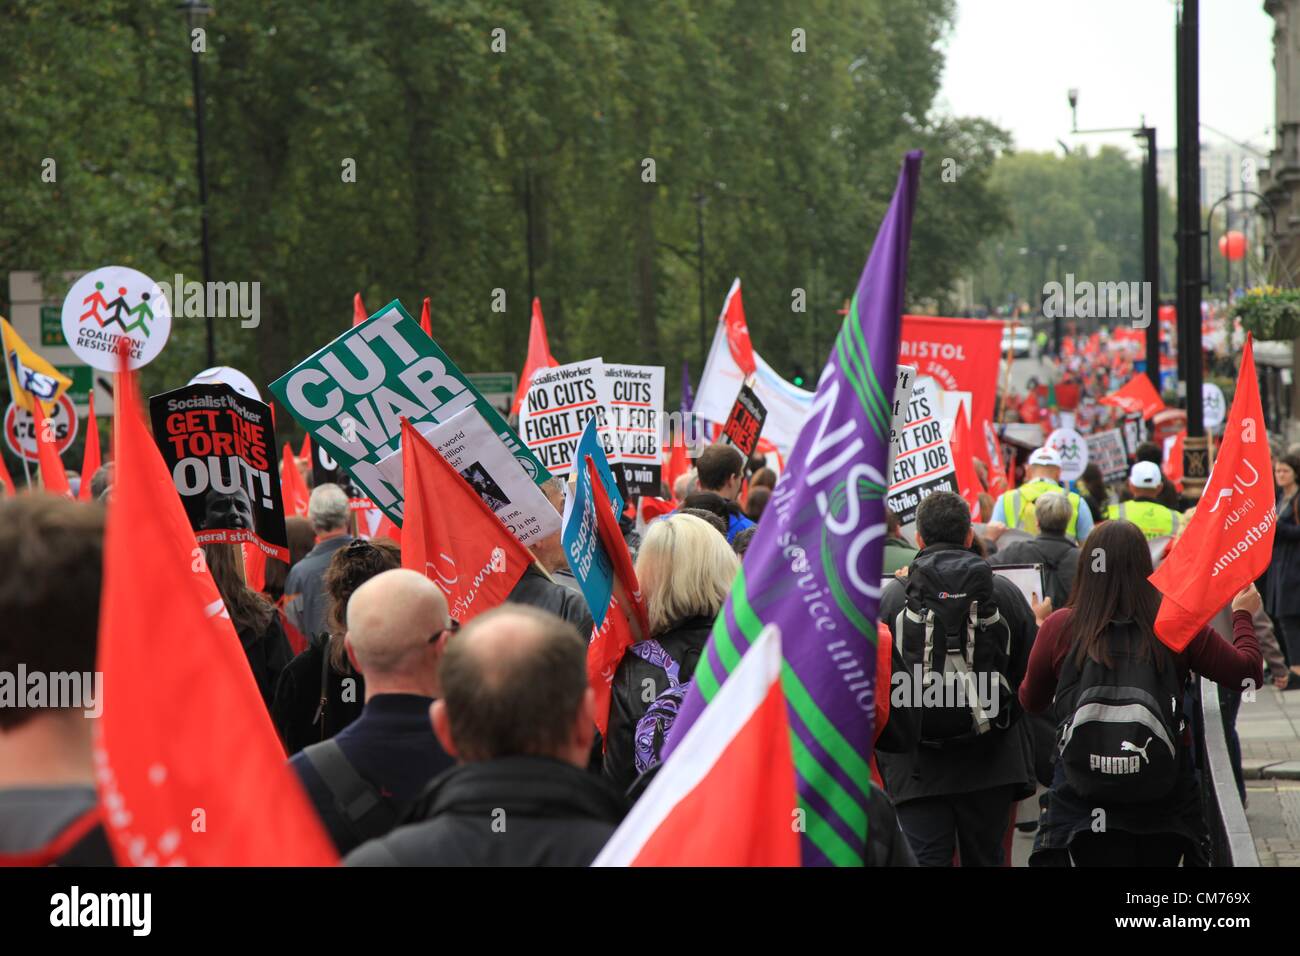 London, UK. 20th October 2012 The main TUC march flows down Piccadilly towards the rally in Hyde Park. Thousands gathered in Central London to join the march 'A Future that Works' organized by TUC. Credit:  nelson pereira / Alamy Live News Stock Photo